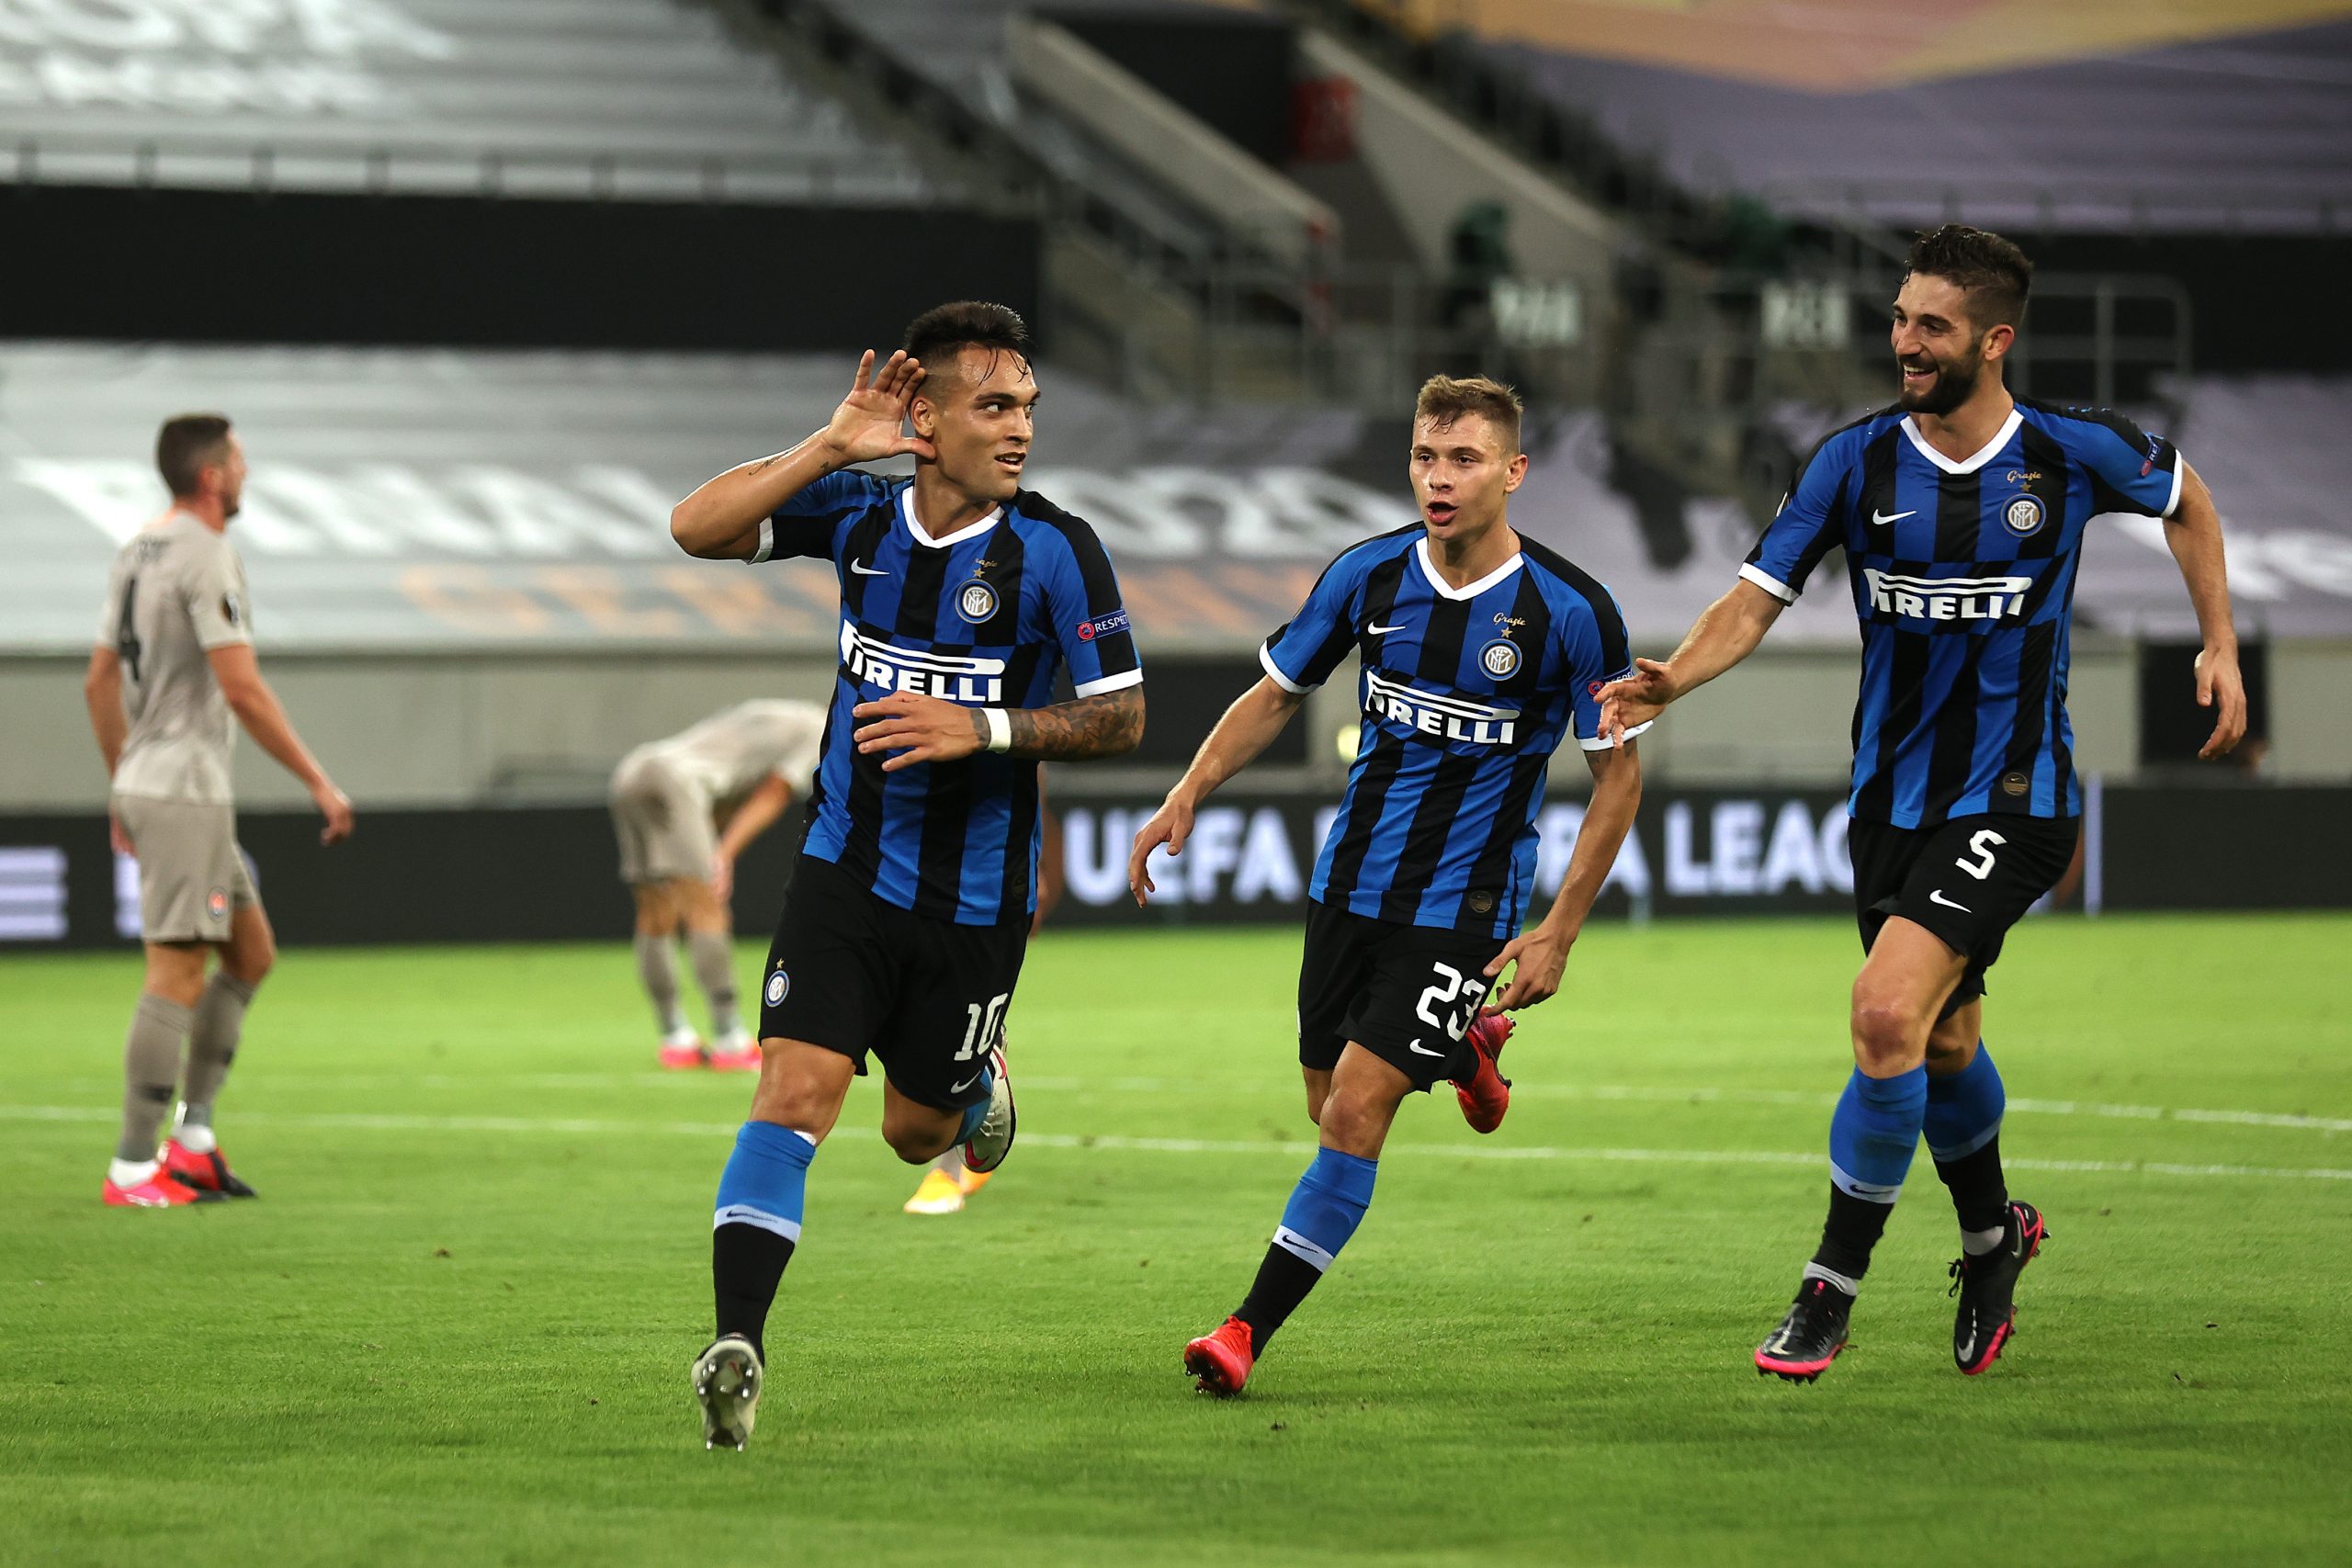 Lautaro Martinez (L) celebrates after scoring a goal (Getty Images)